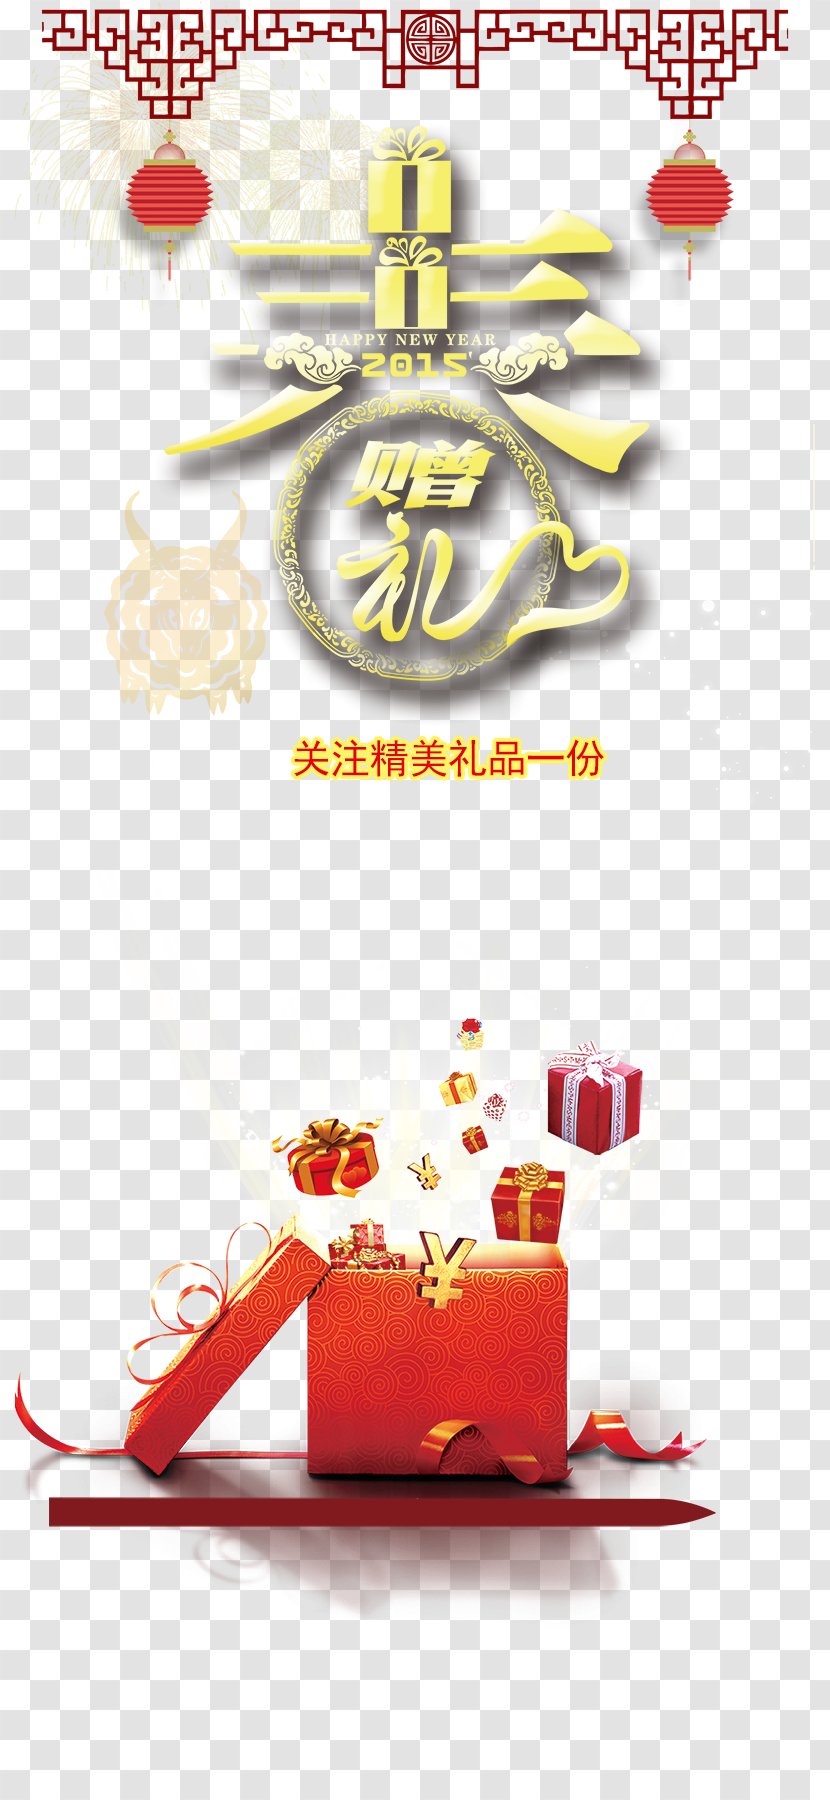 Chinese New Year Gift Gratis - Holiday - Gifts Transparent PNG